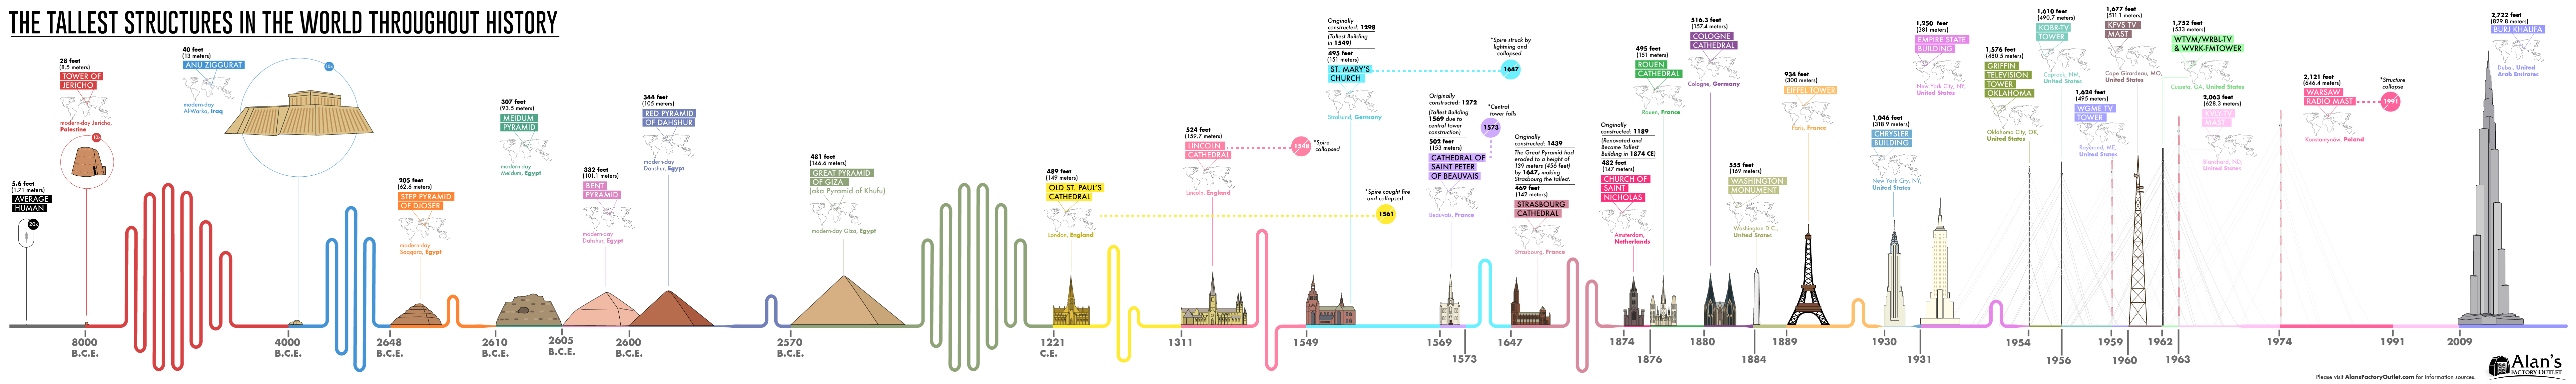 Tallest Structures in History Timeline